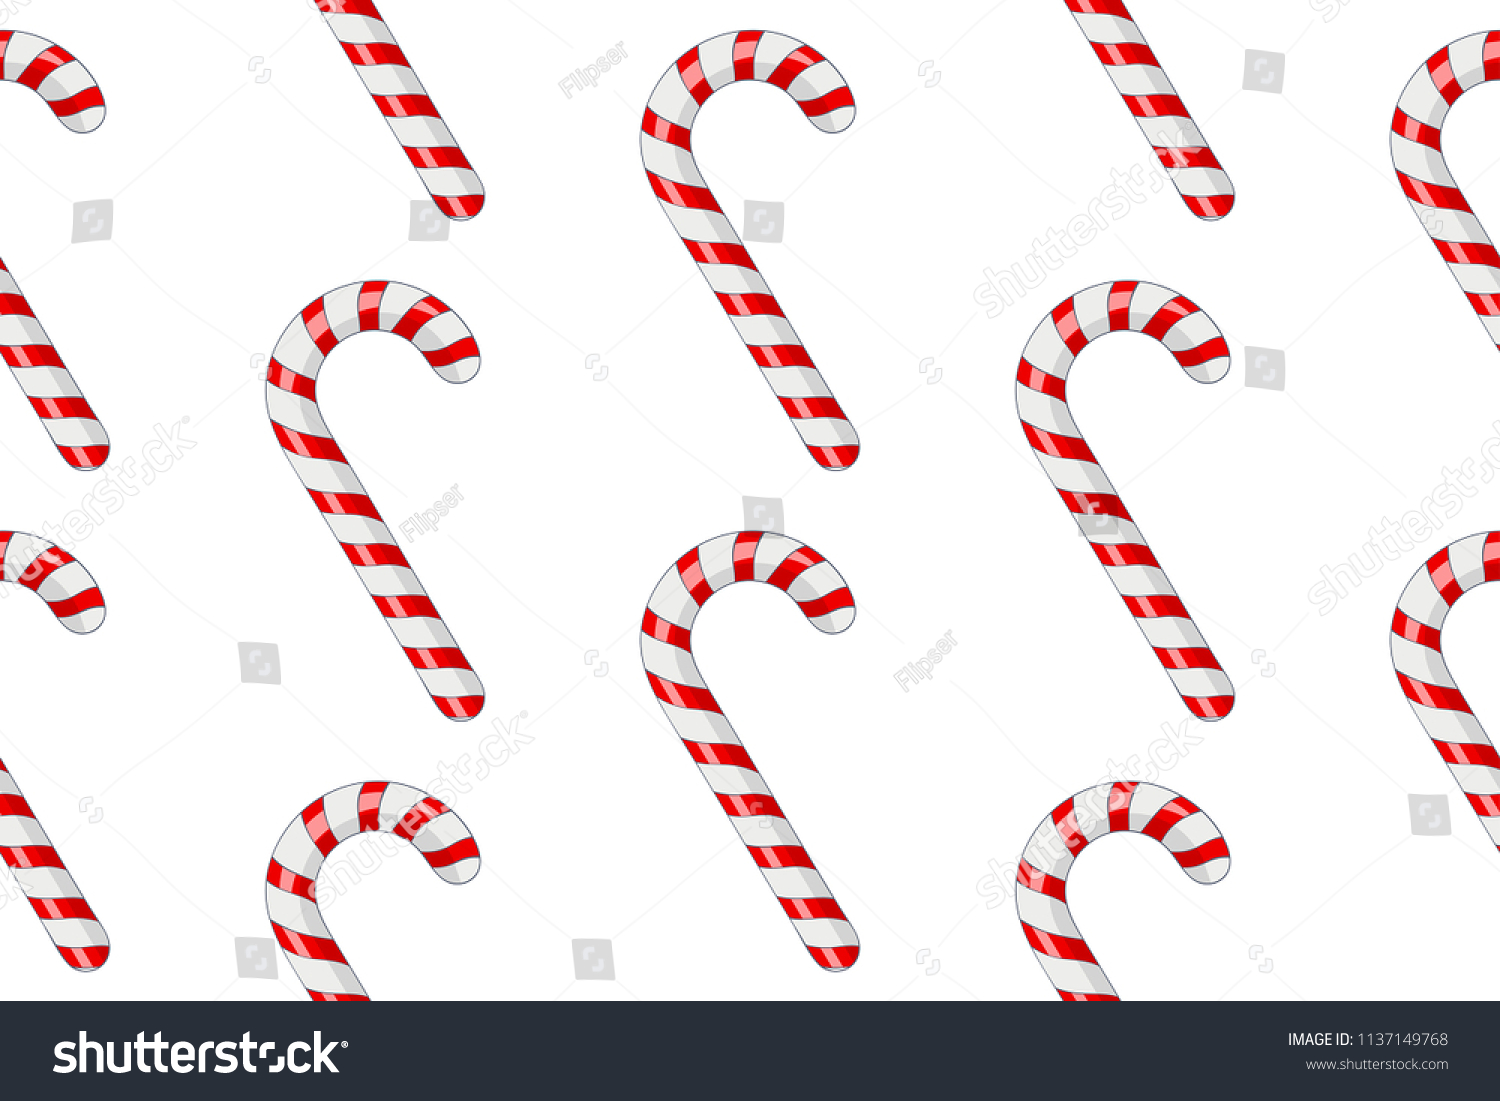 Red and White Christmas Nail Art with Candy Canes - wide 3